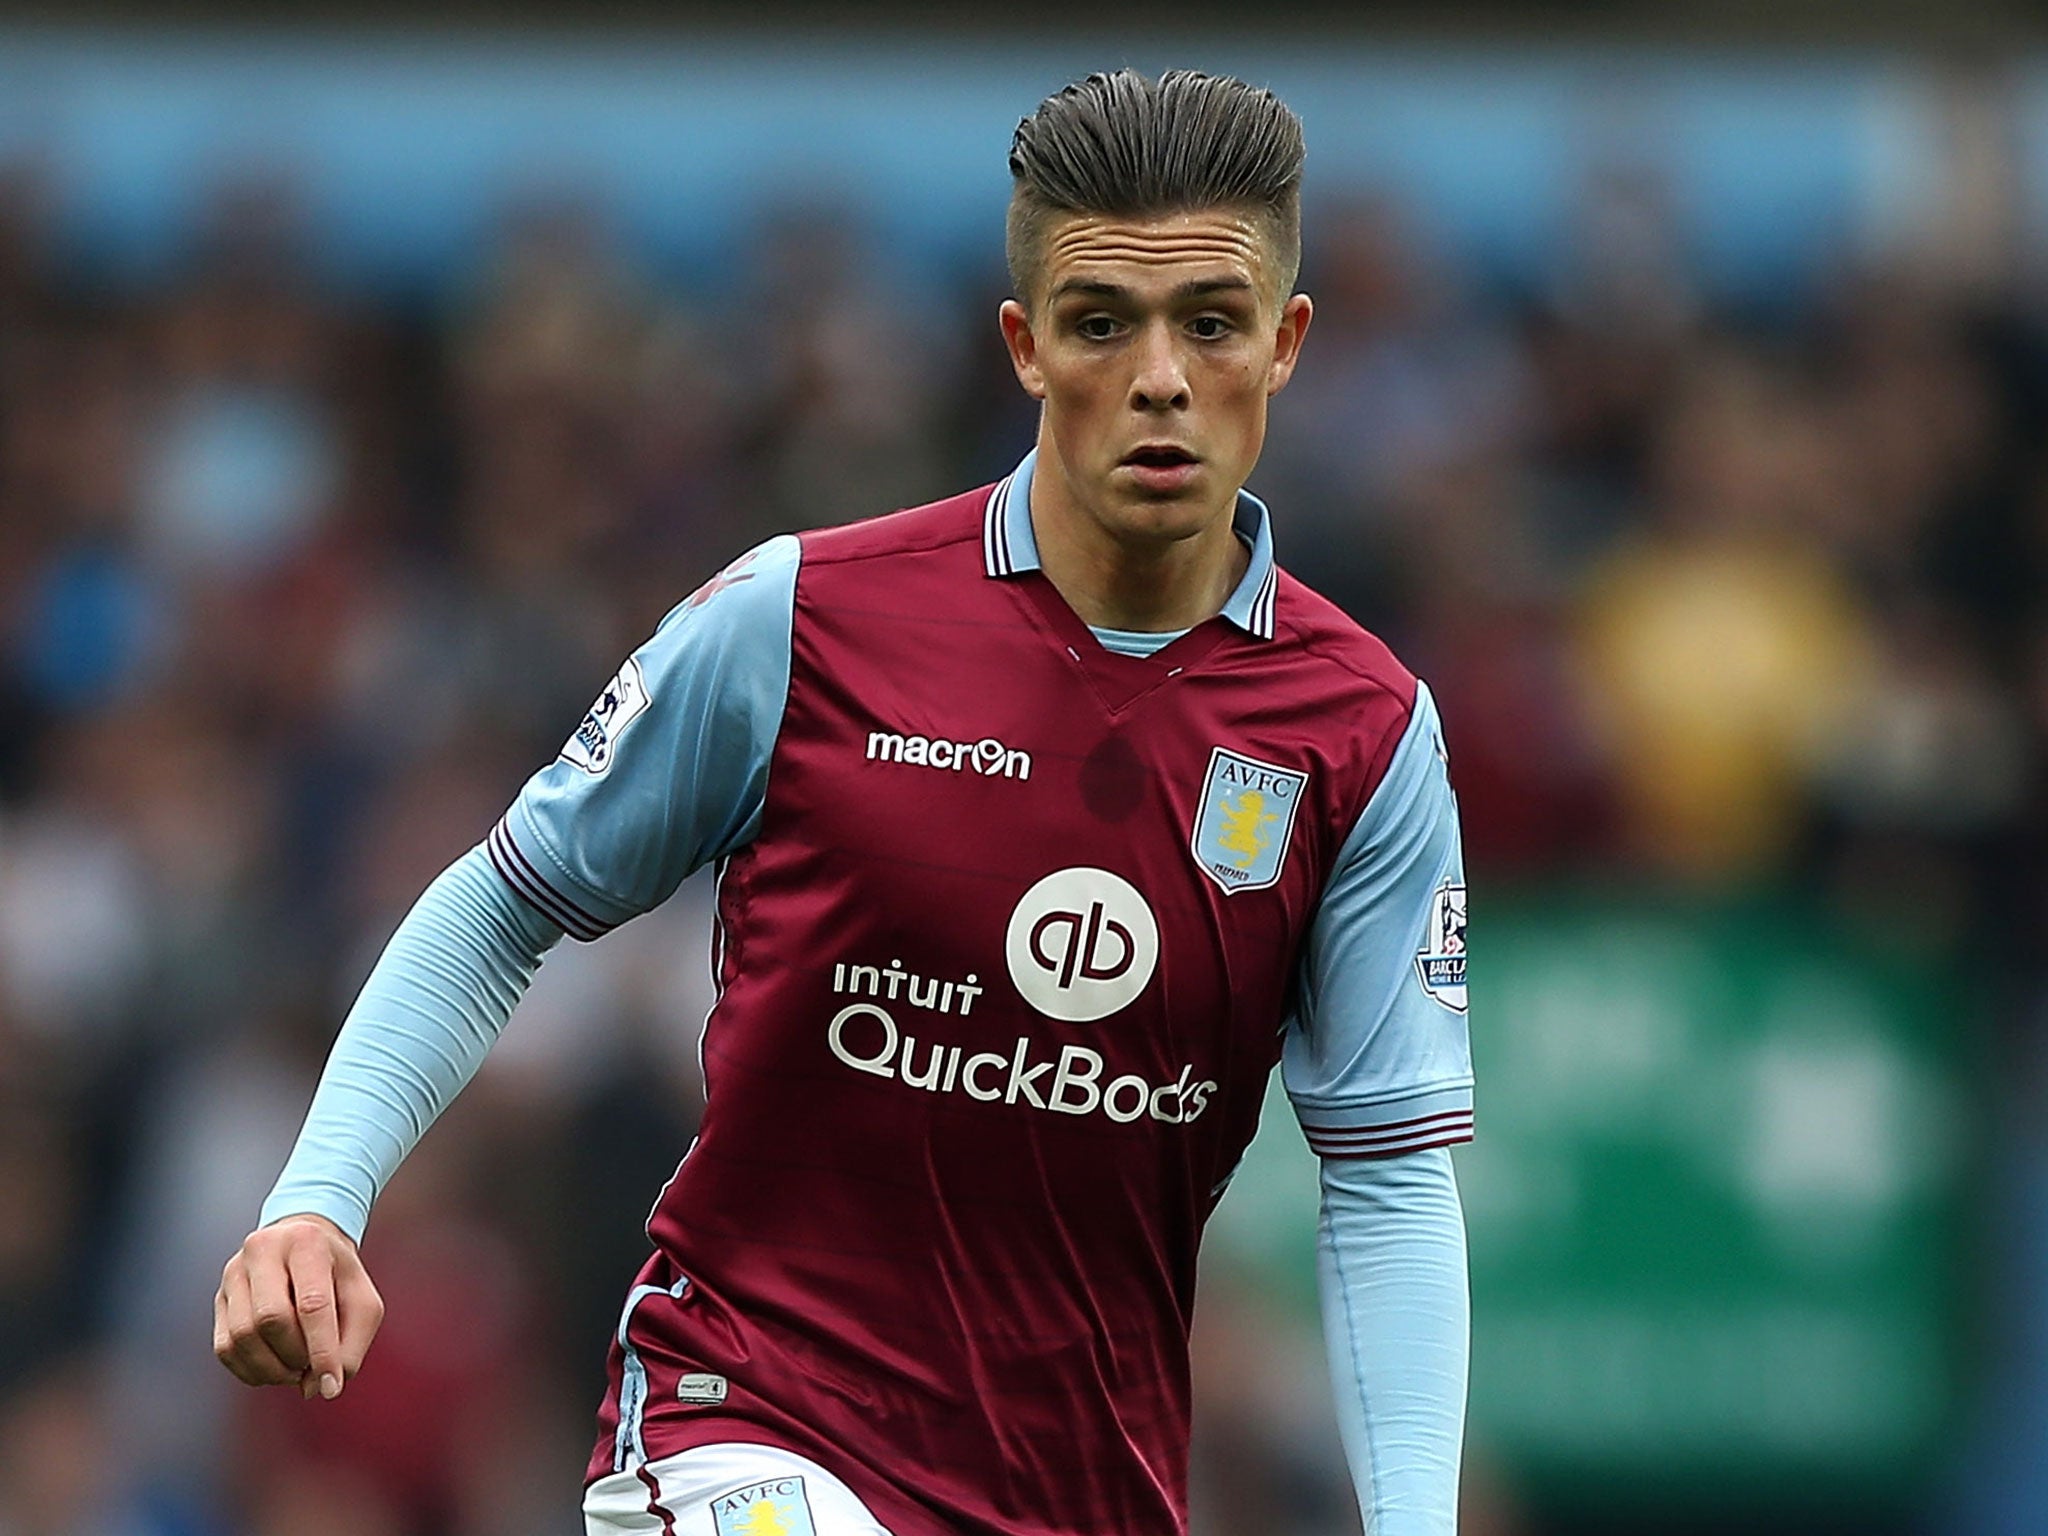 Jack Grealish has been training with the Under-21s rather than the first team